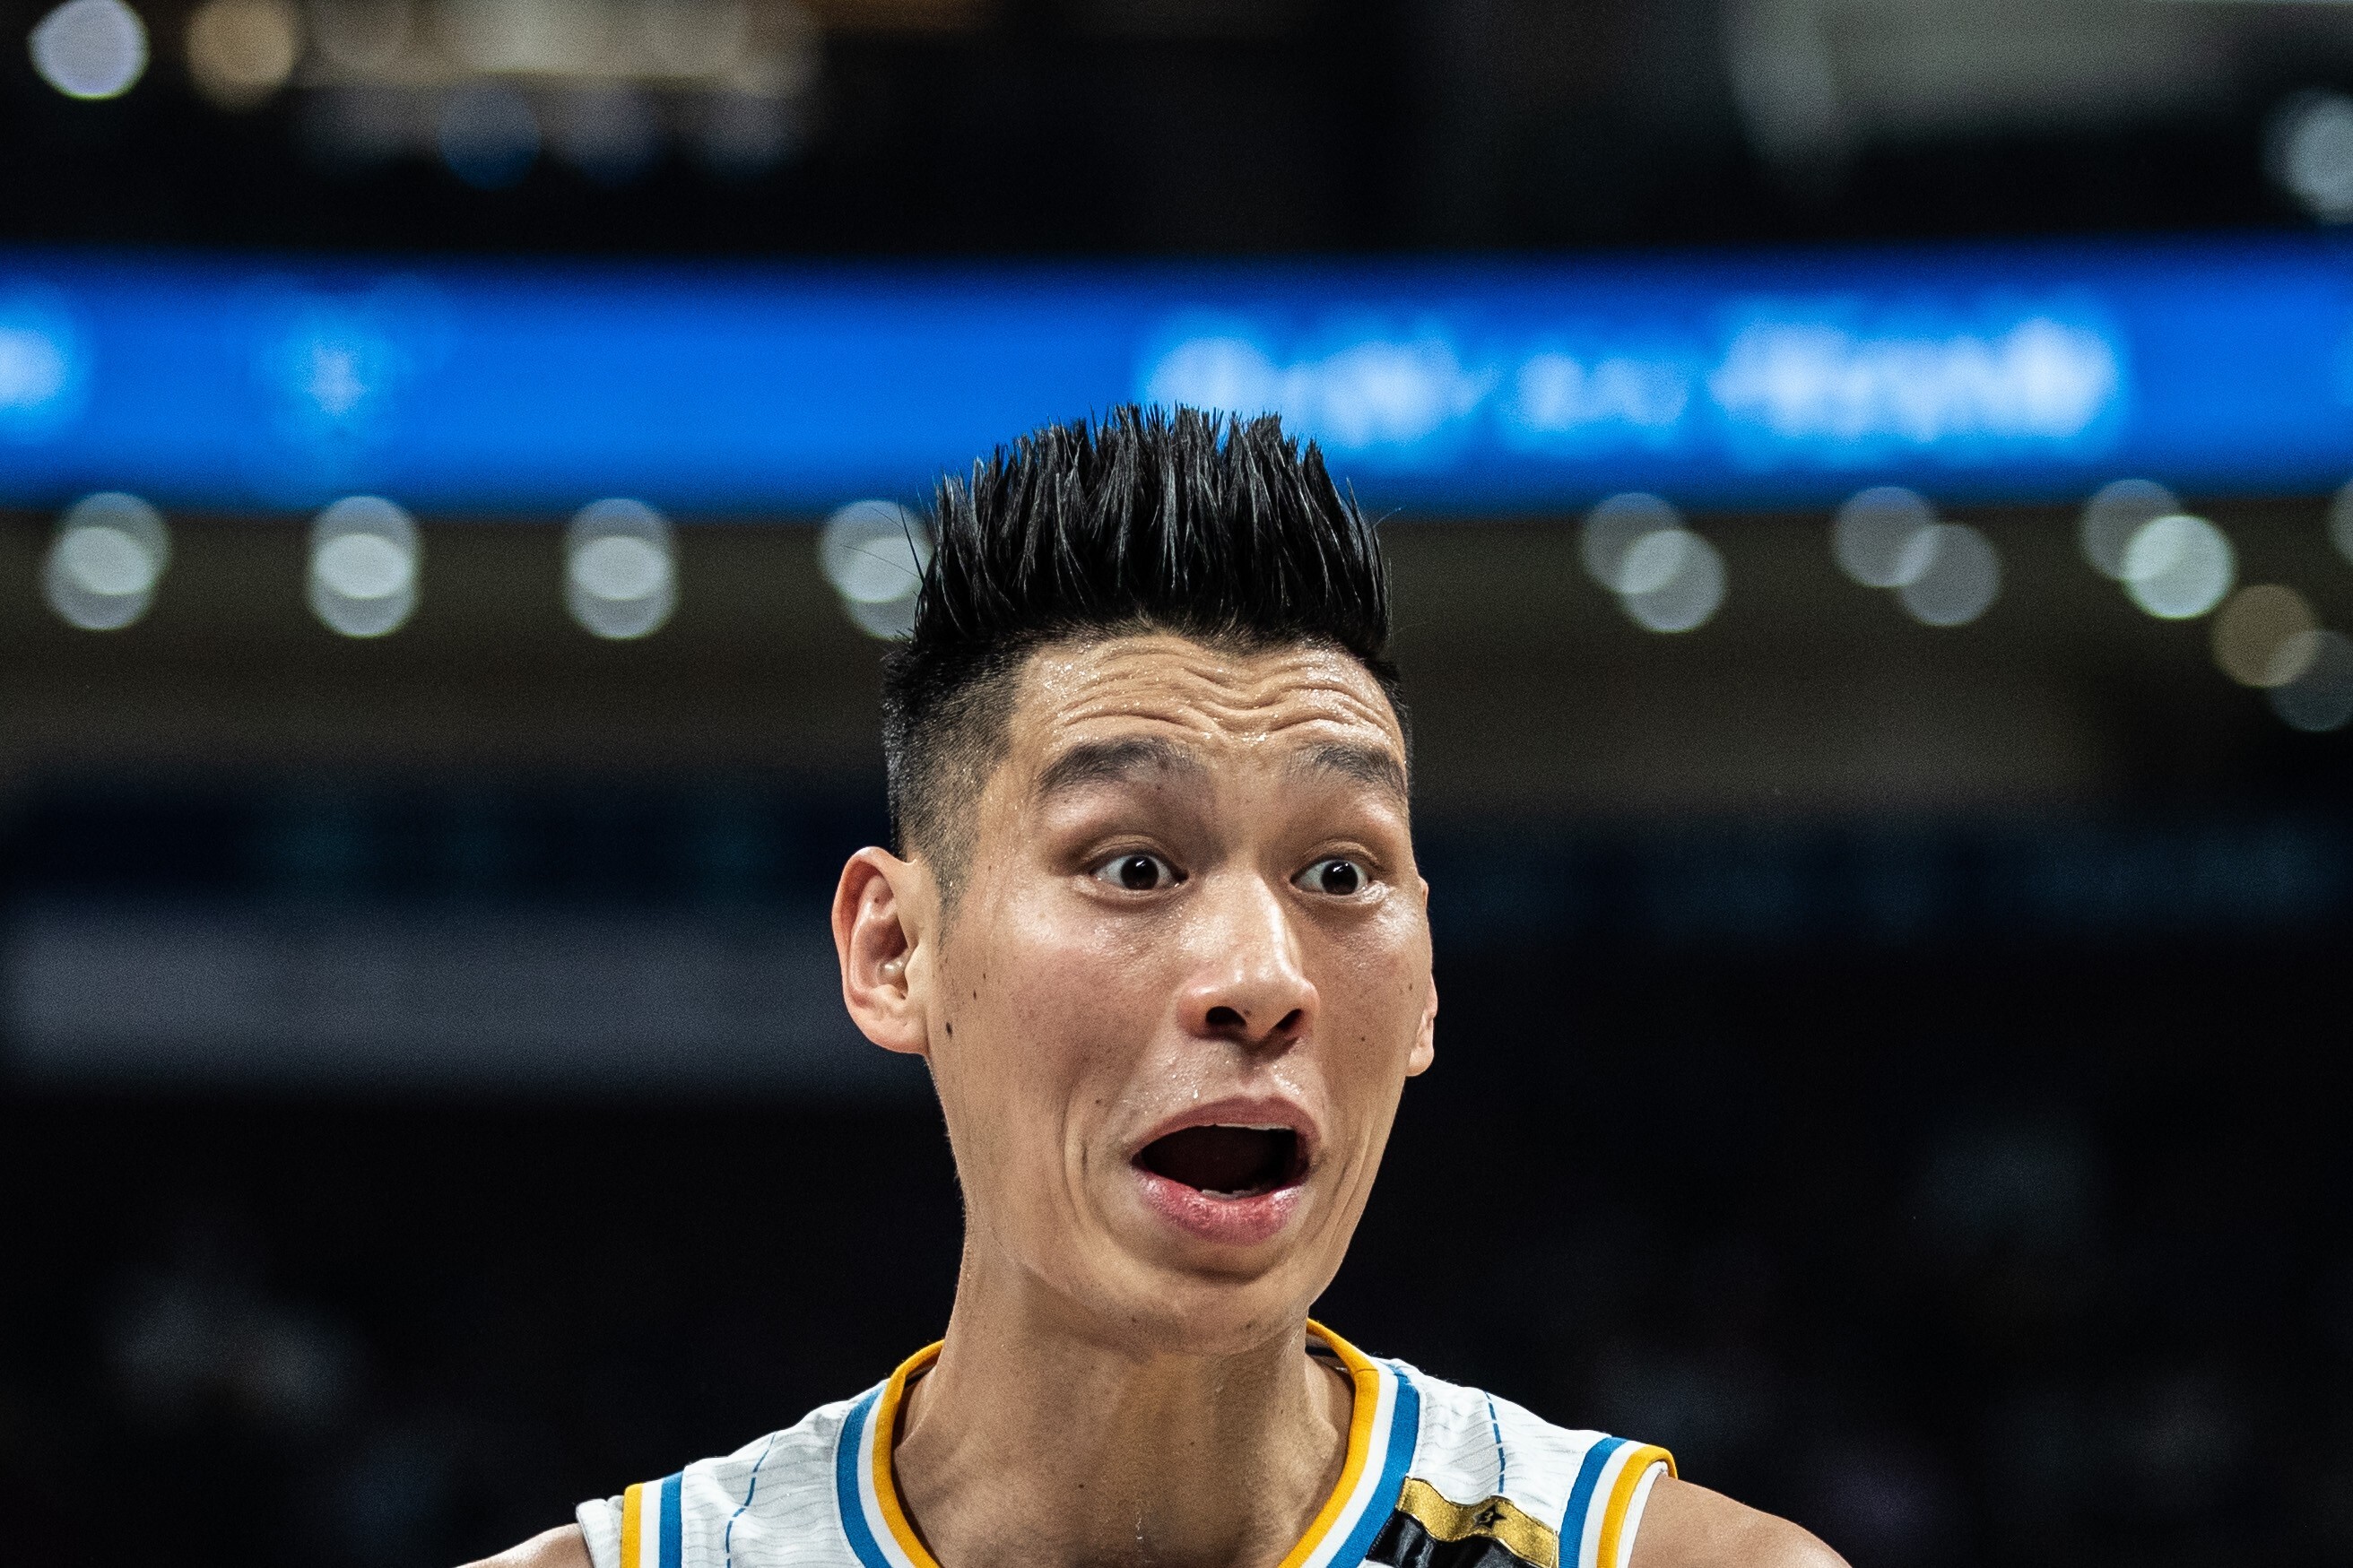 Jeremy Lin's Beijing Ducks lose second CBA game in a row after